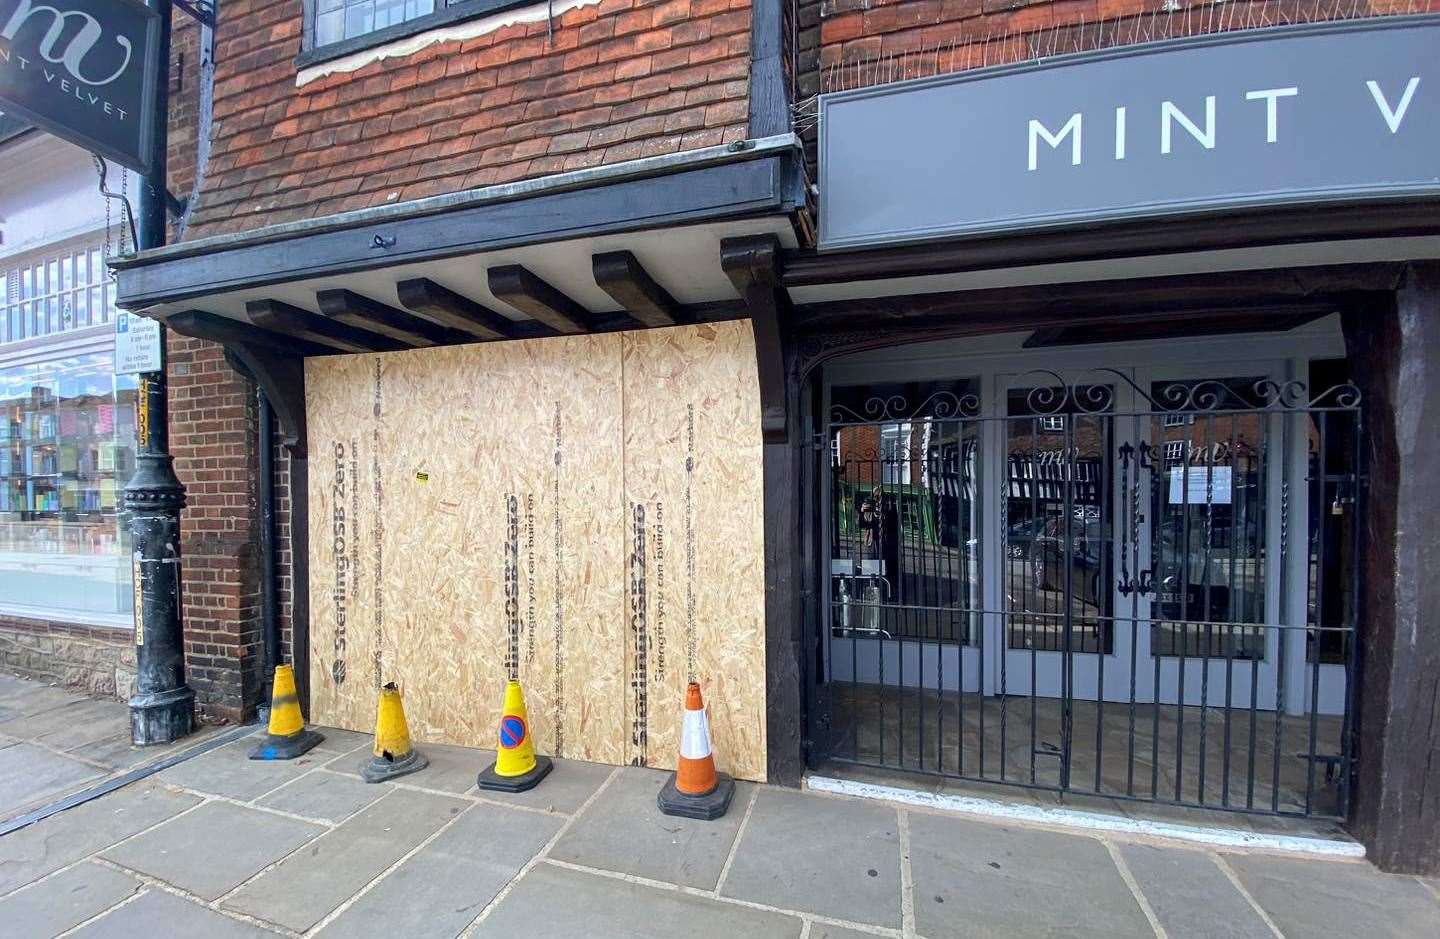 Mint Velvet in Tenterden had to close after a car drove into the shop front smashing a window.